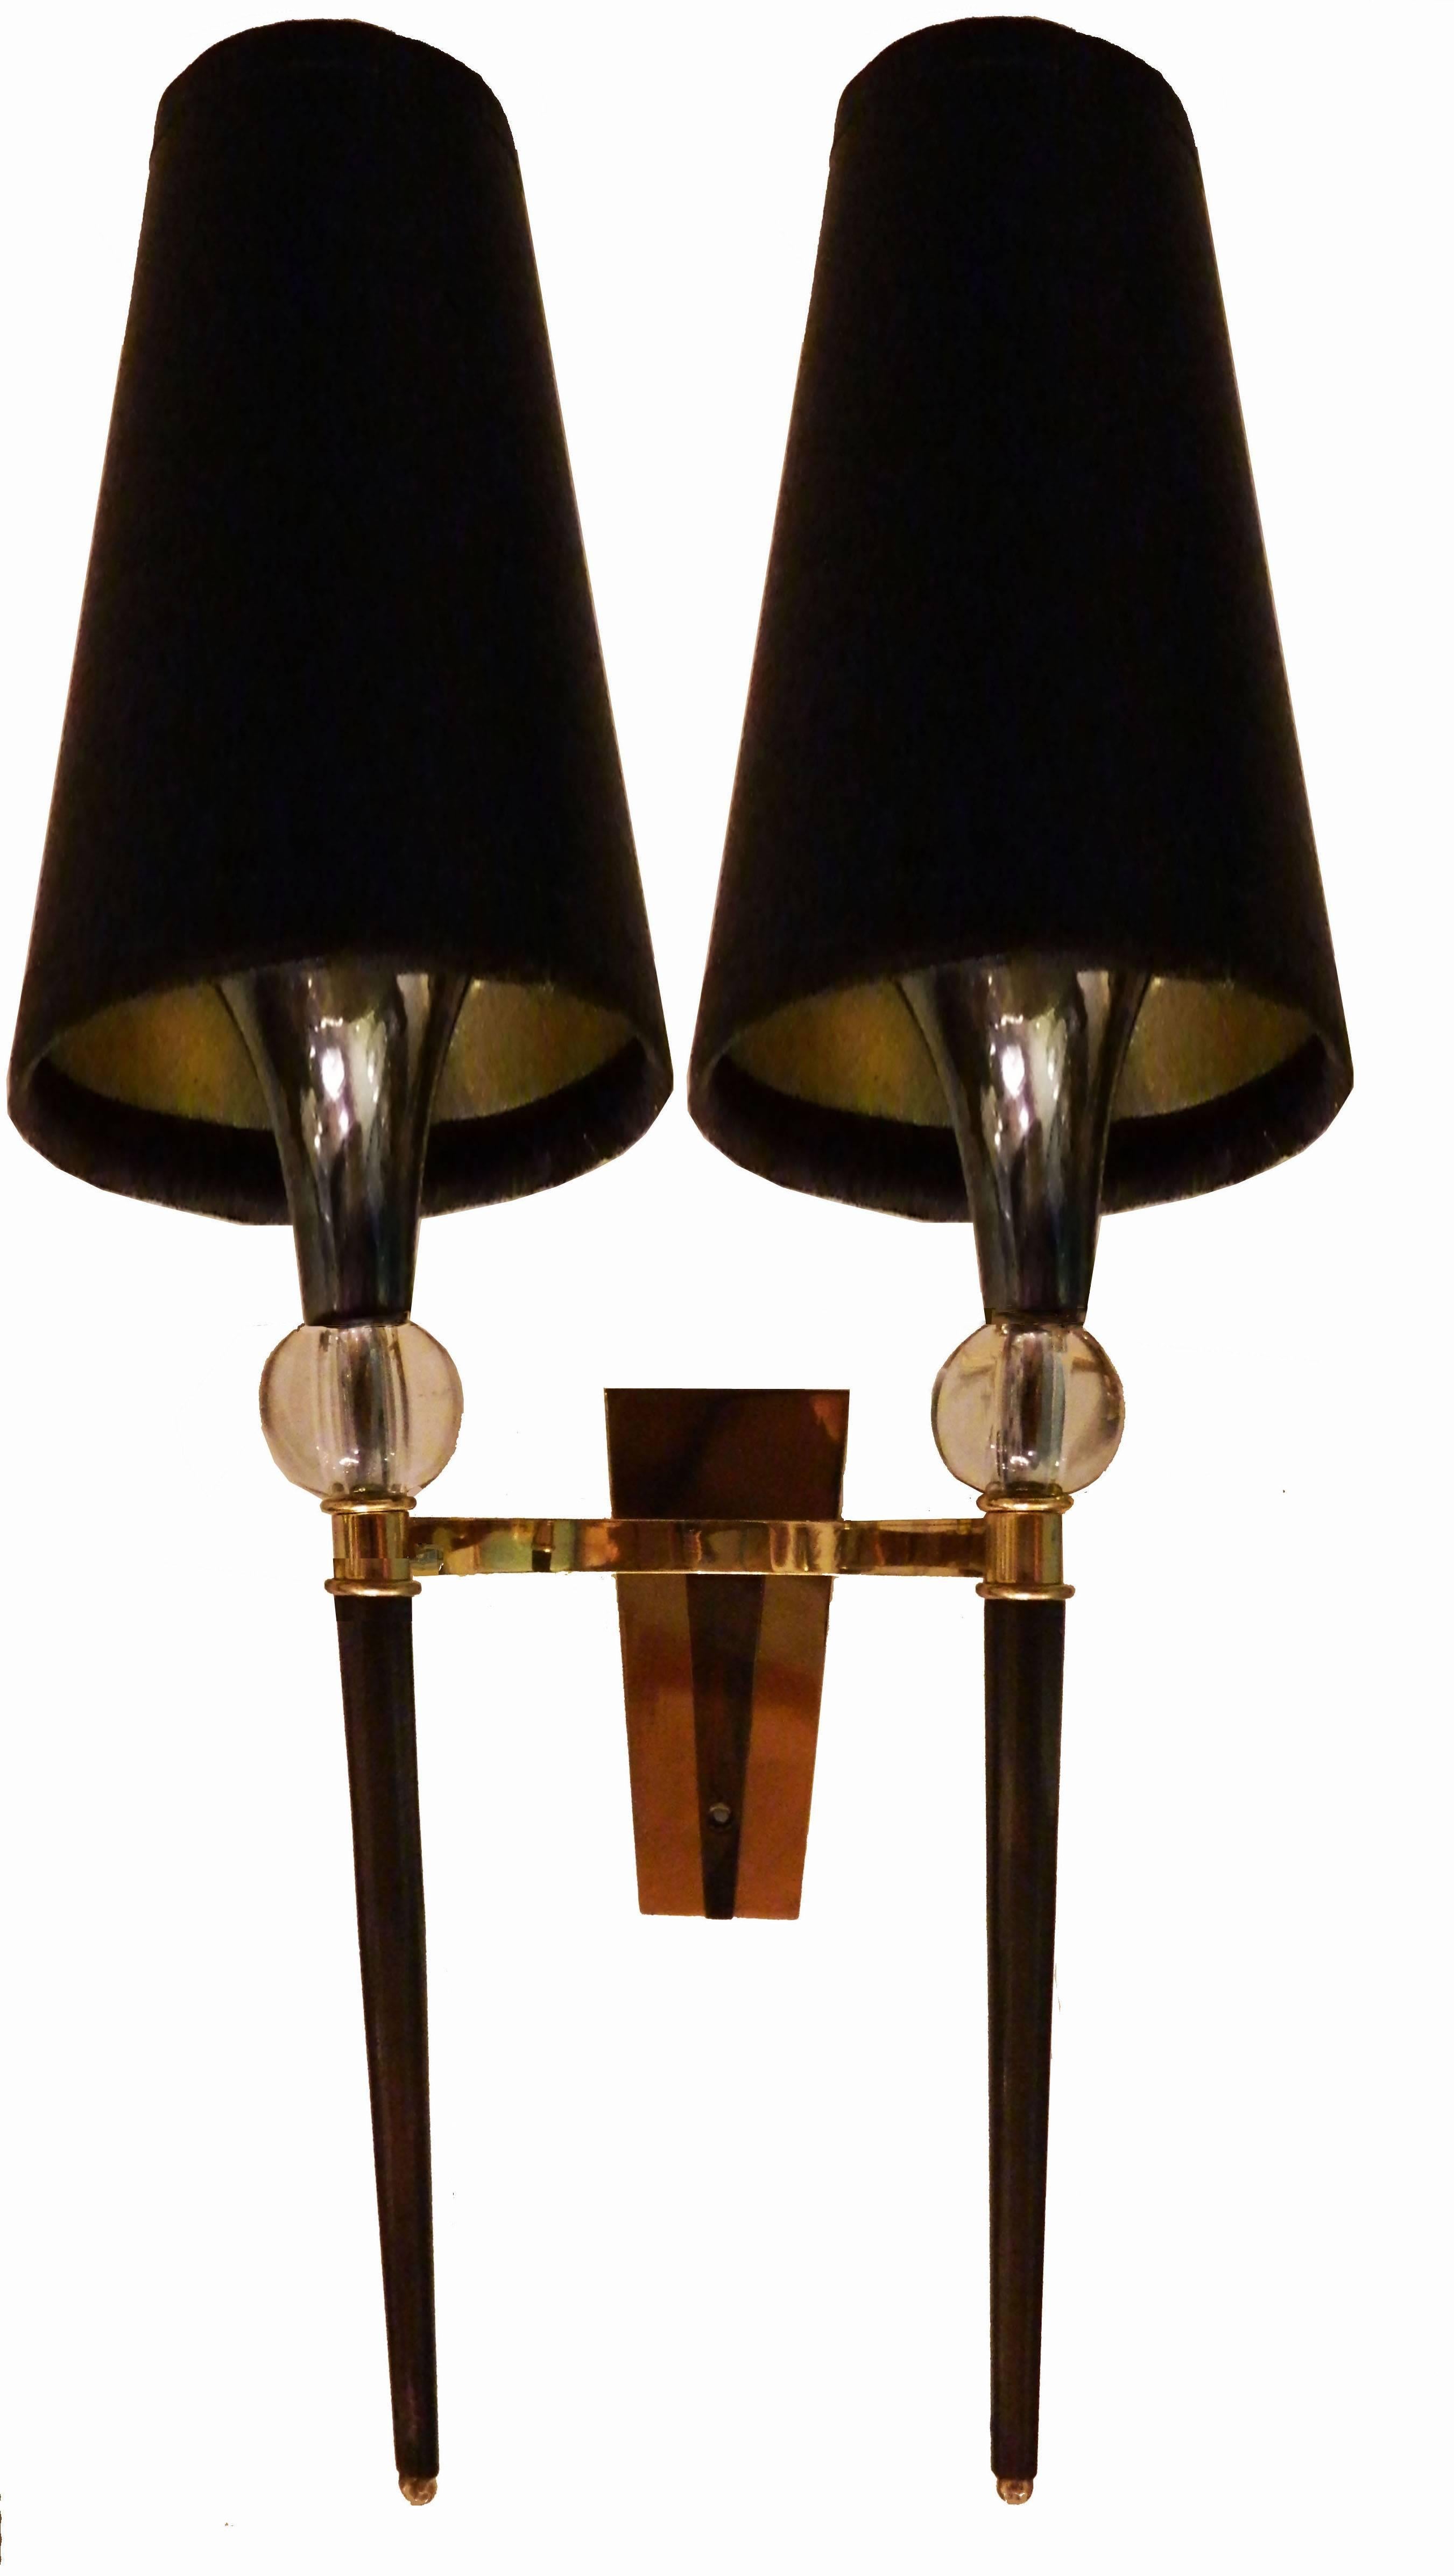 Maison Jansen Pair of Sconces In Excellent Condition For Sale In Miami, FL